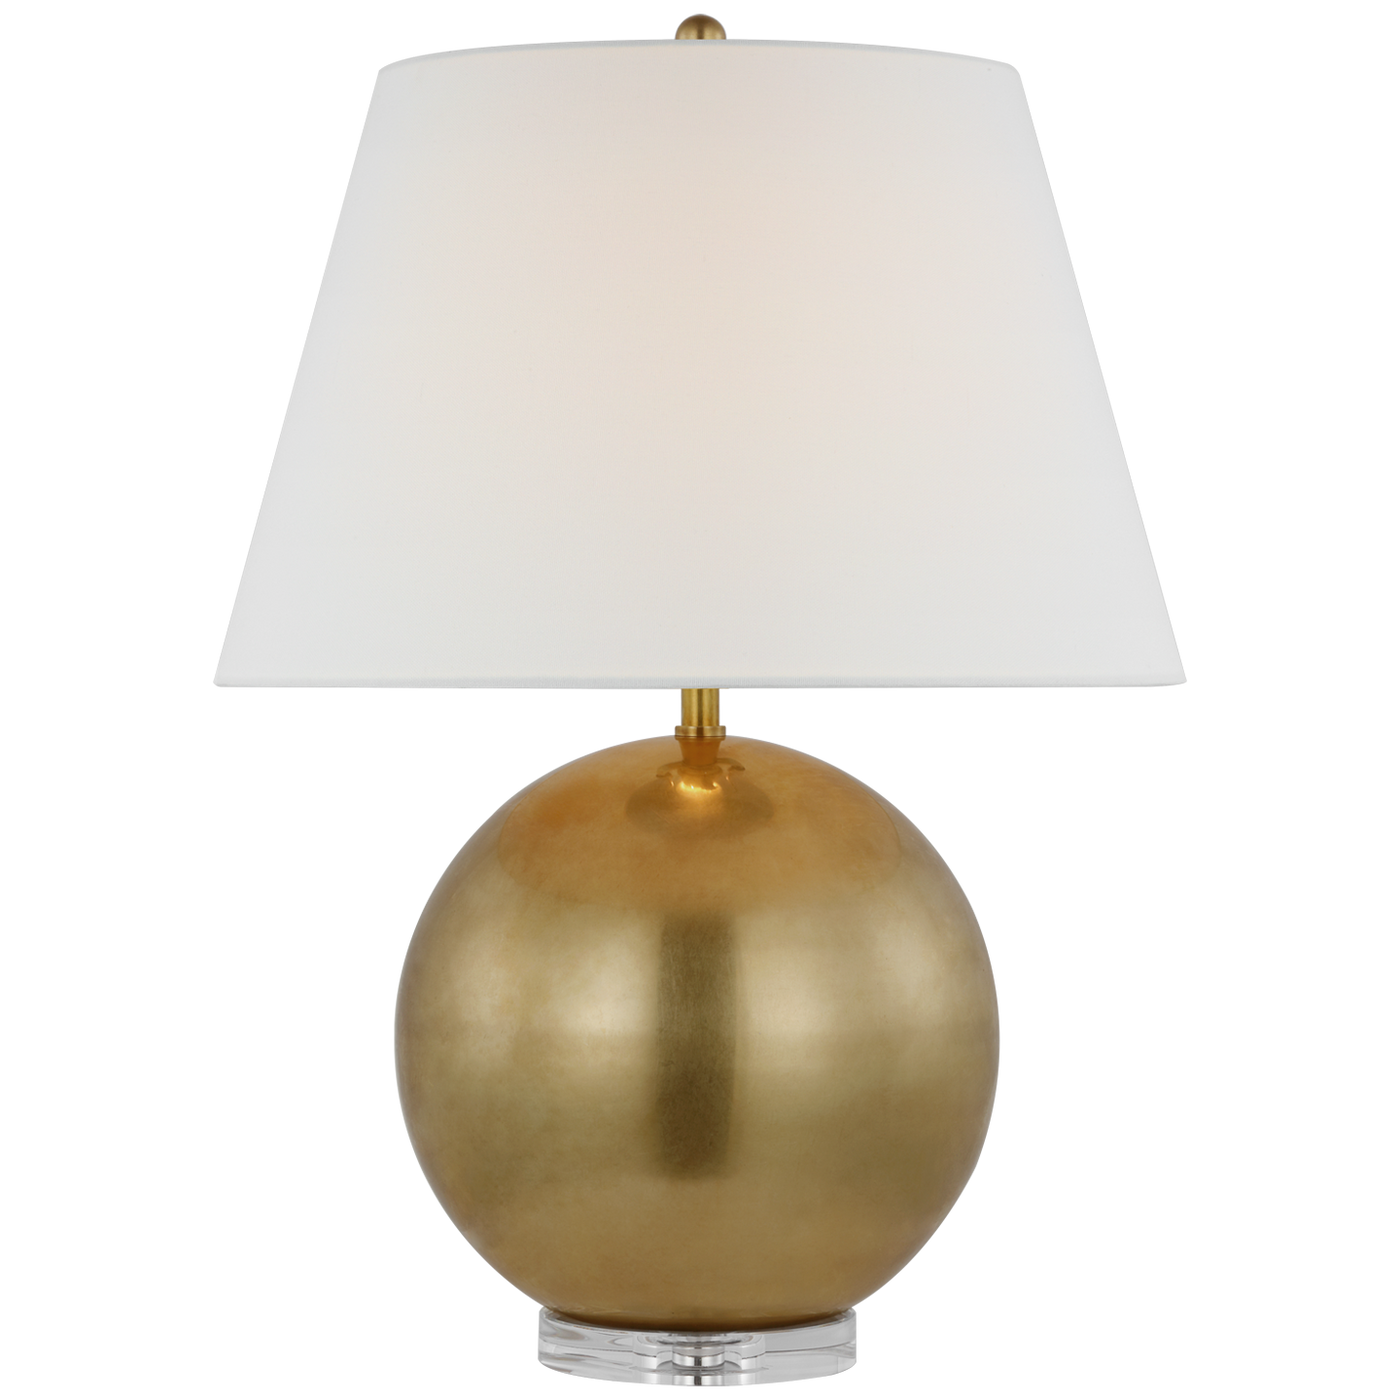 TABLE LAMP ANTIQUE BRASS ROUND